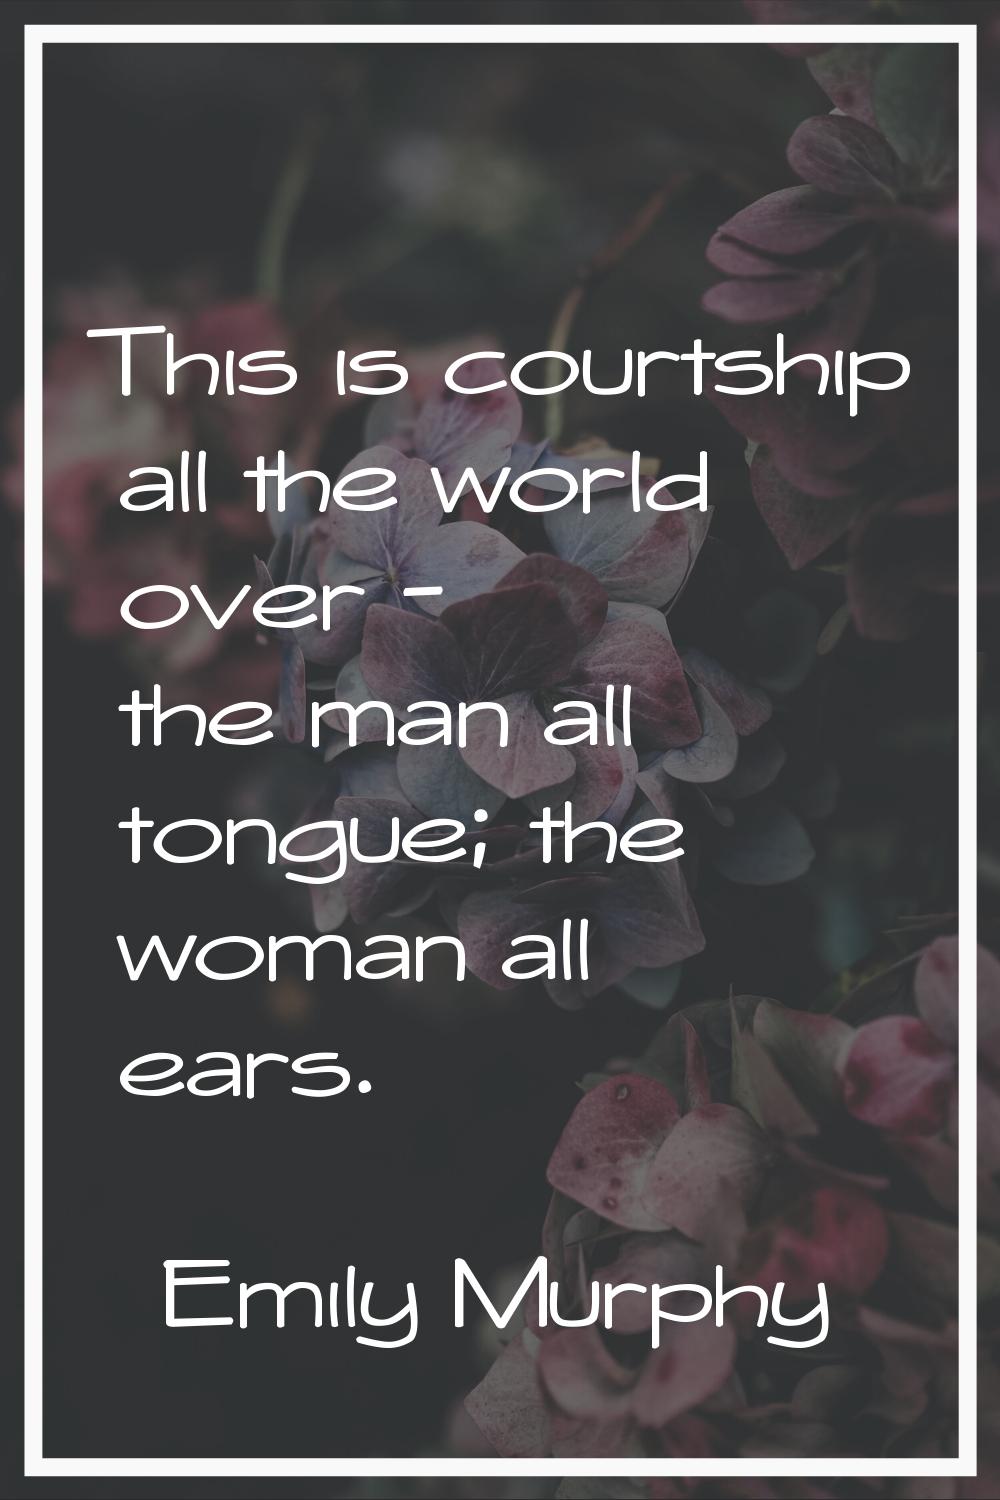 This is courtship all the world over - the man all tongue; the woman all ears.